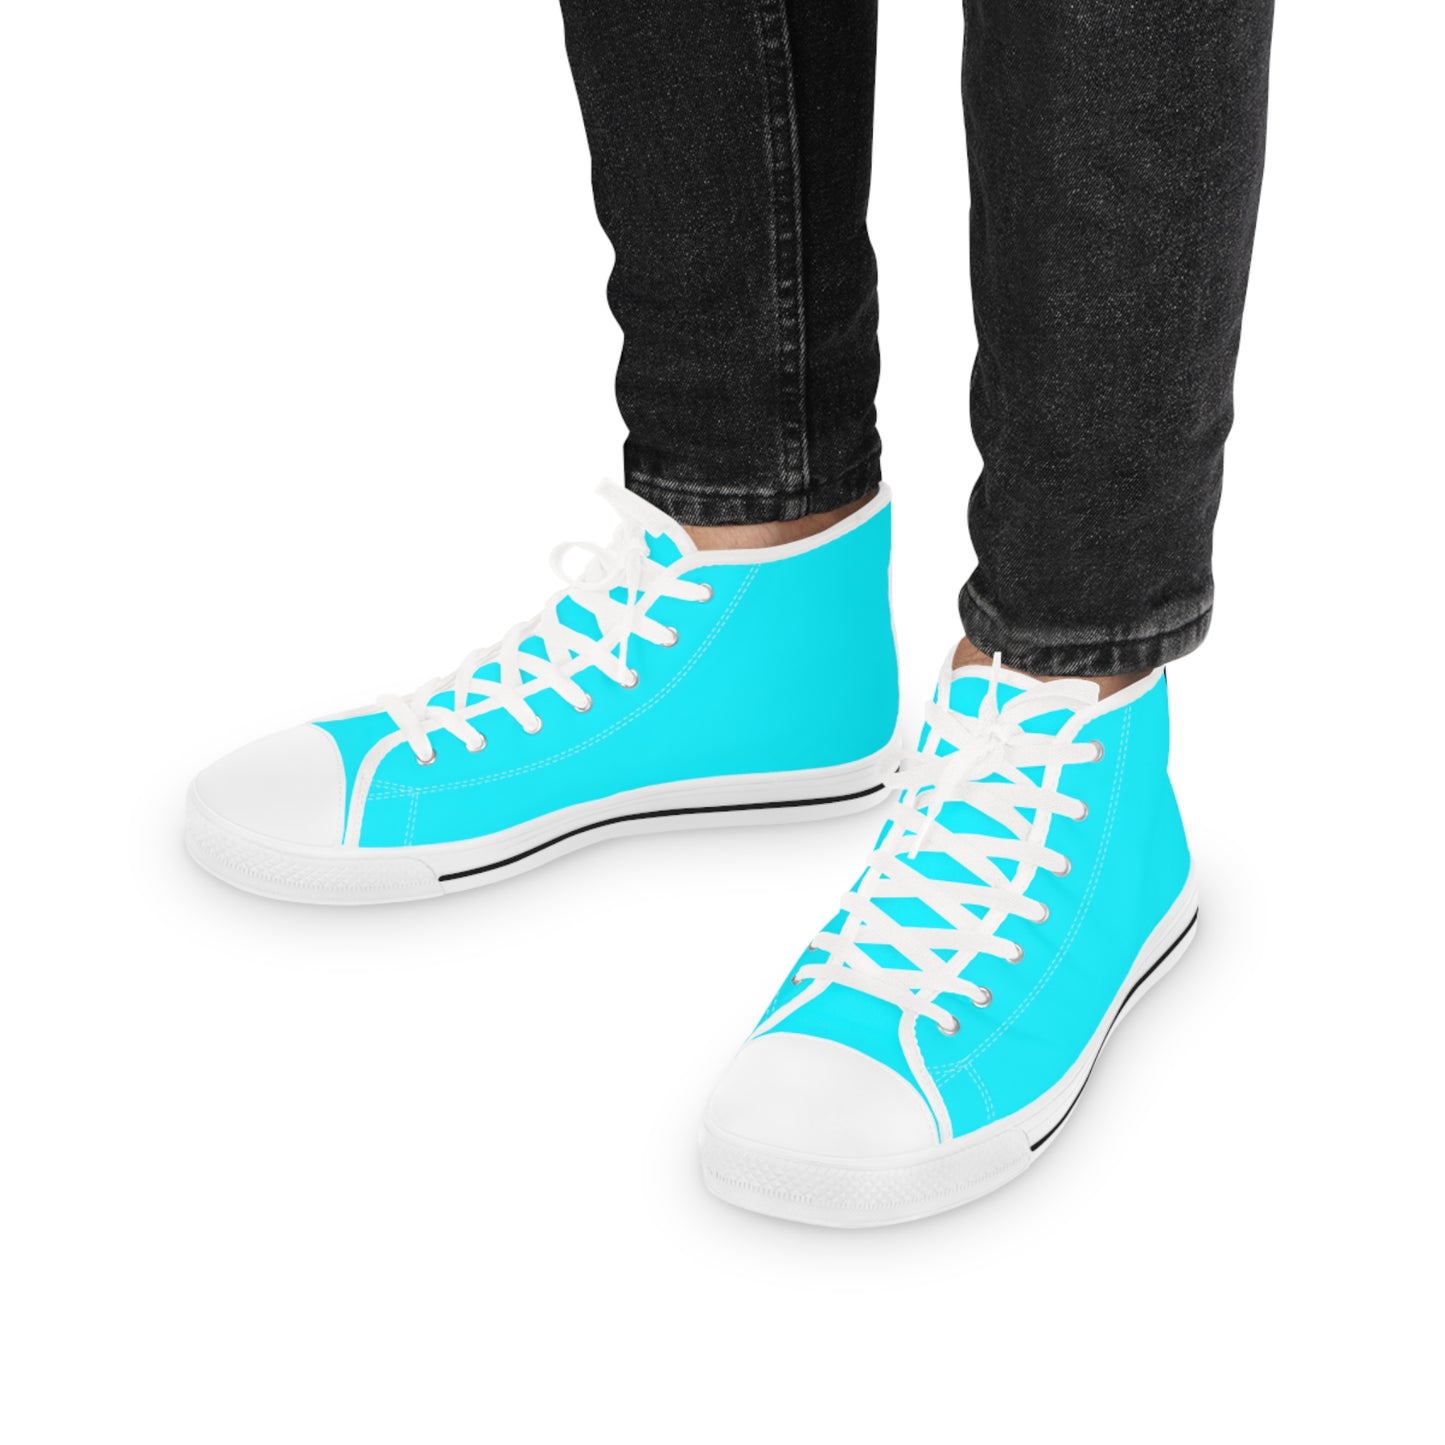 Men's Canvas High Top Solid Color Sneakers - Cool Pool Aqua Blue US 14 White sole